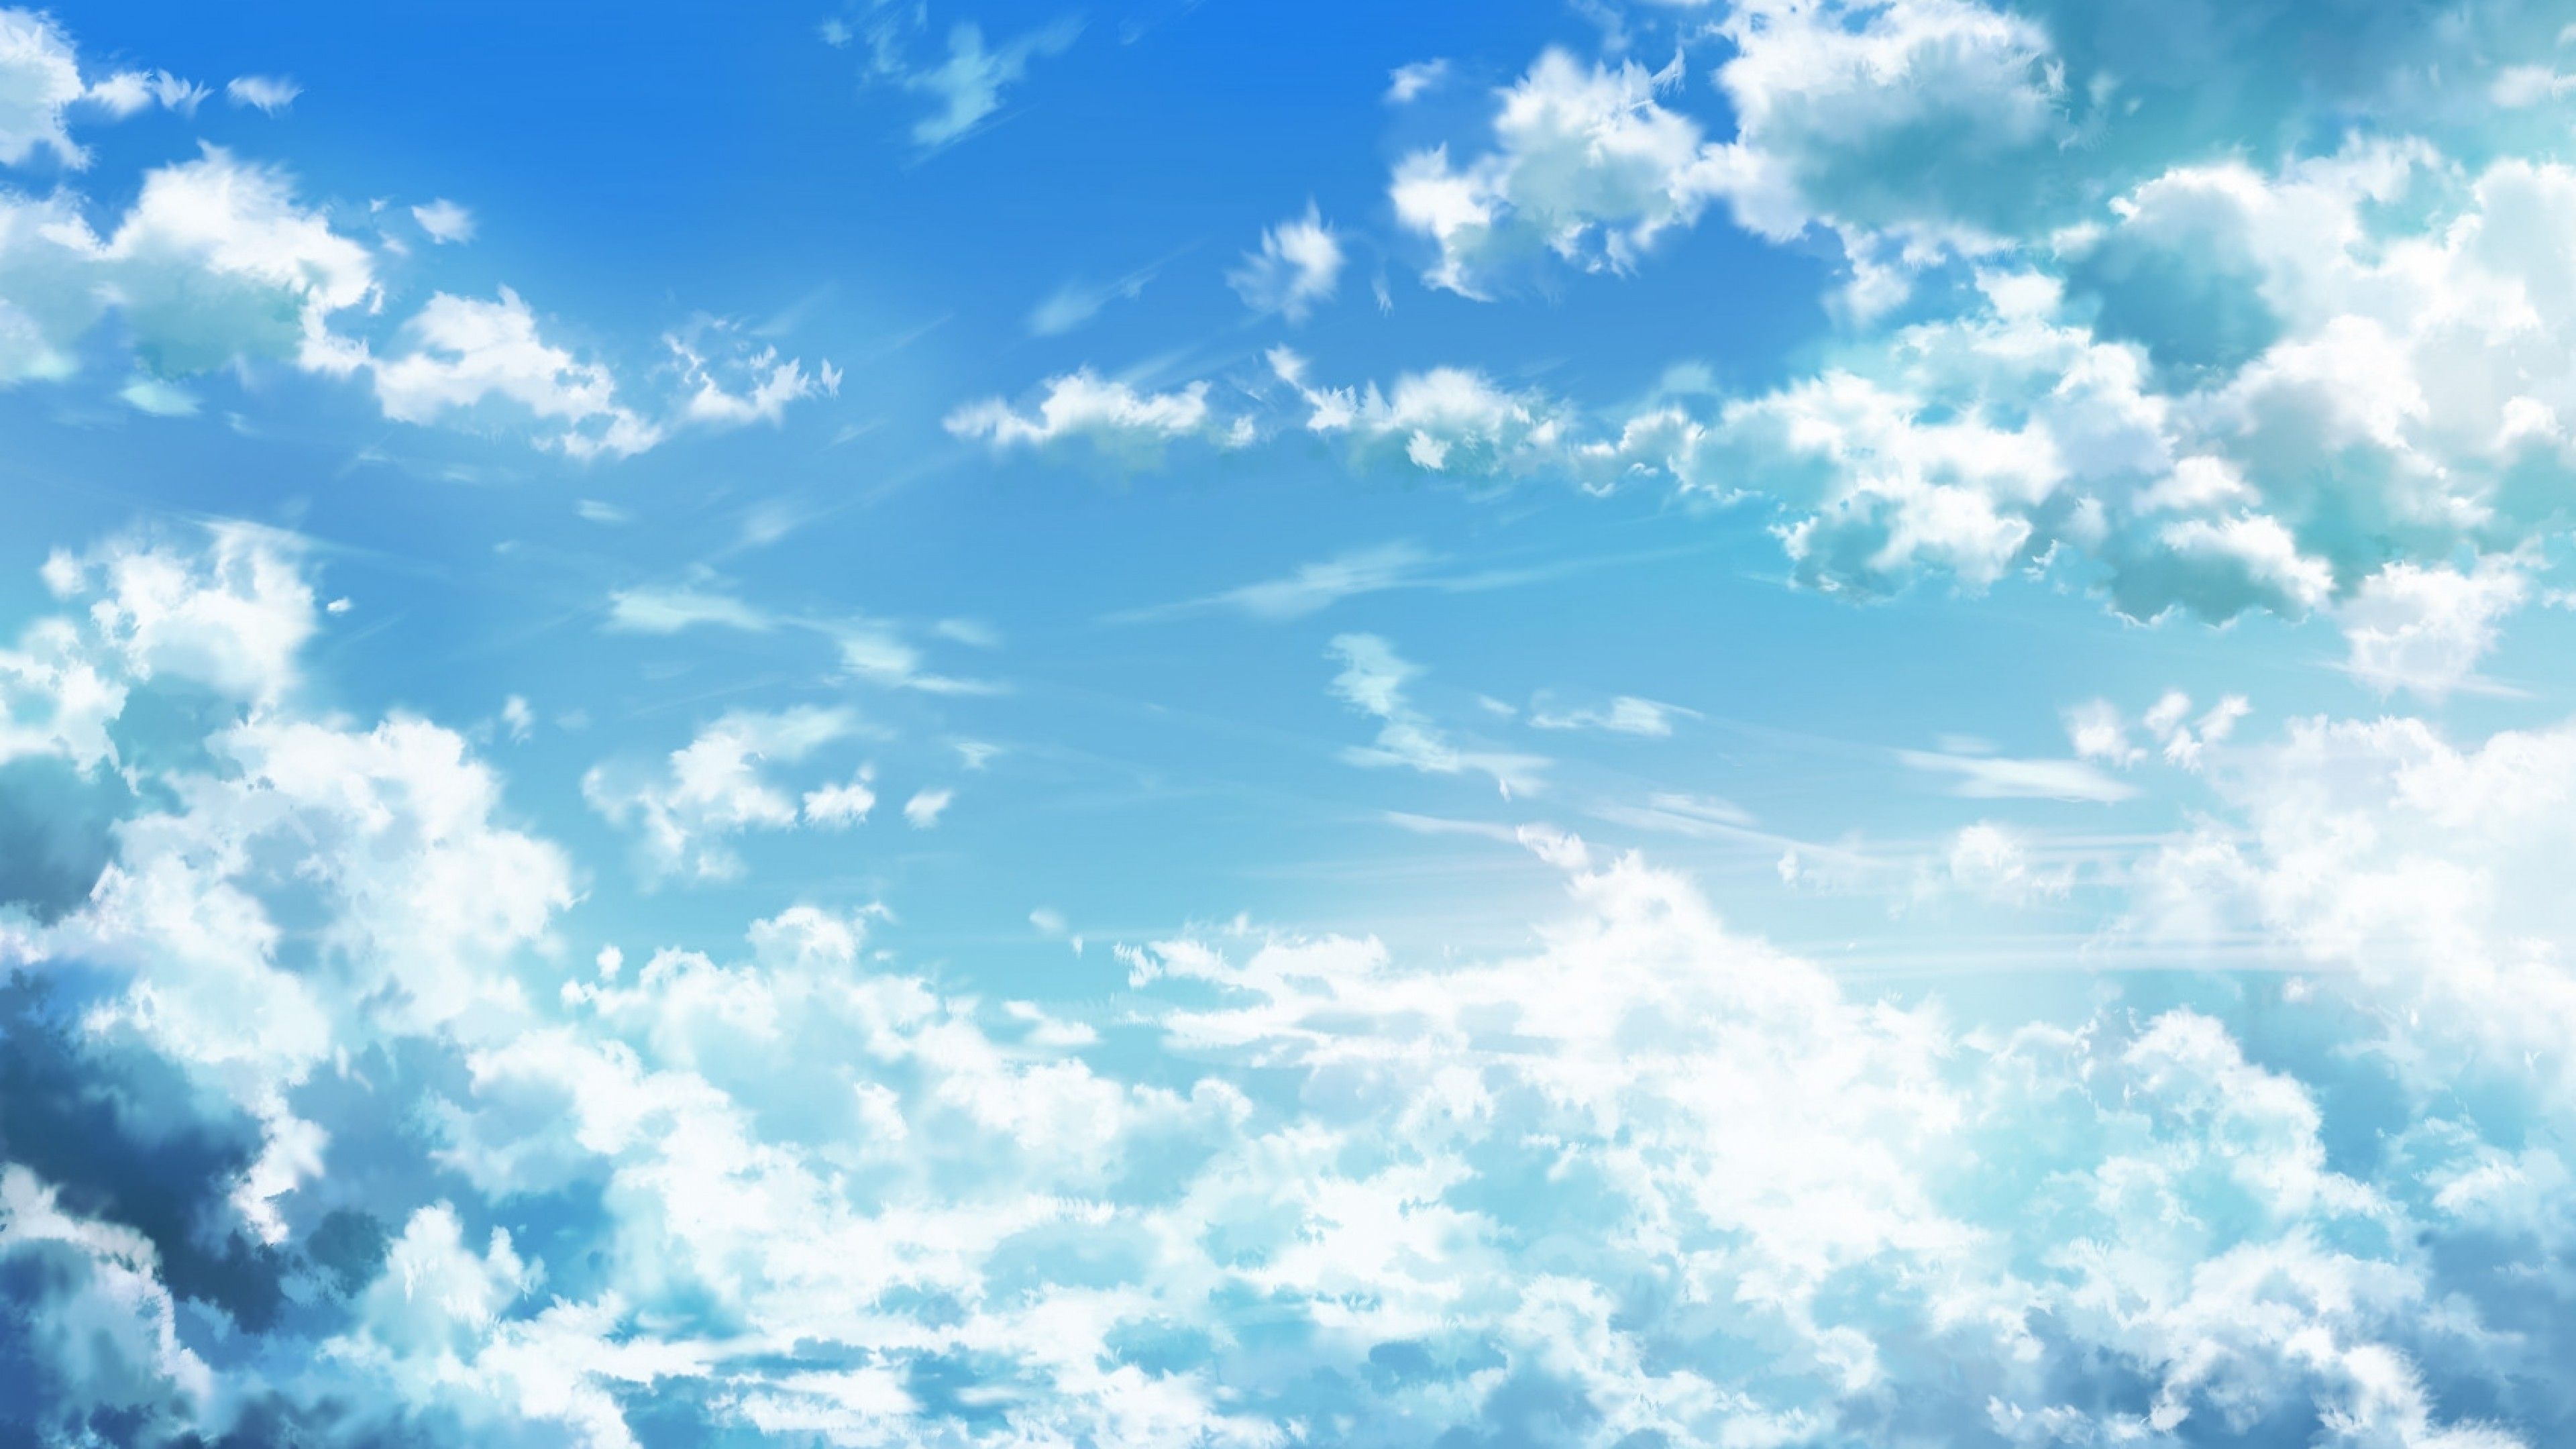 Download 3840x2160 Anime Landscape, Beyond The Clouds, Sky Wallpaper for UHD TV